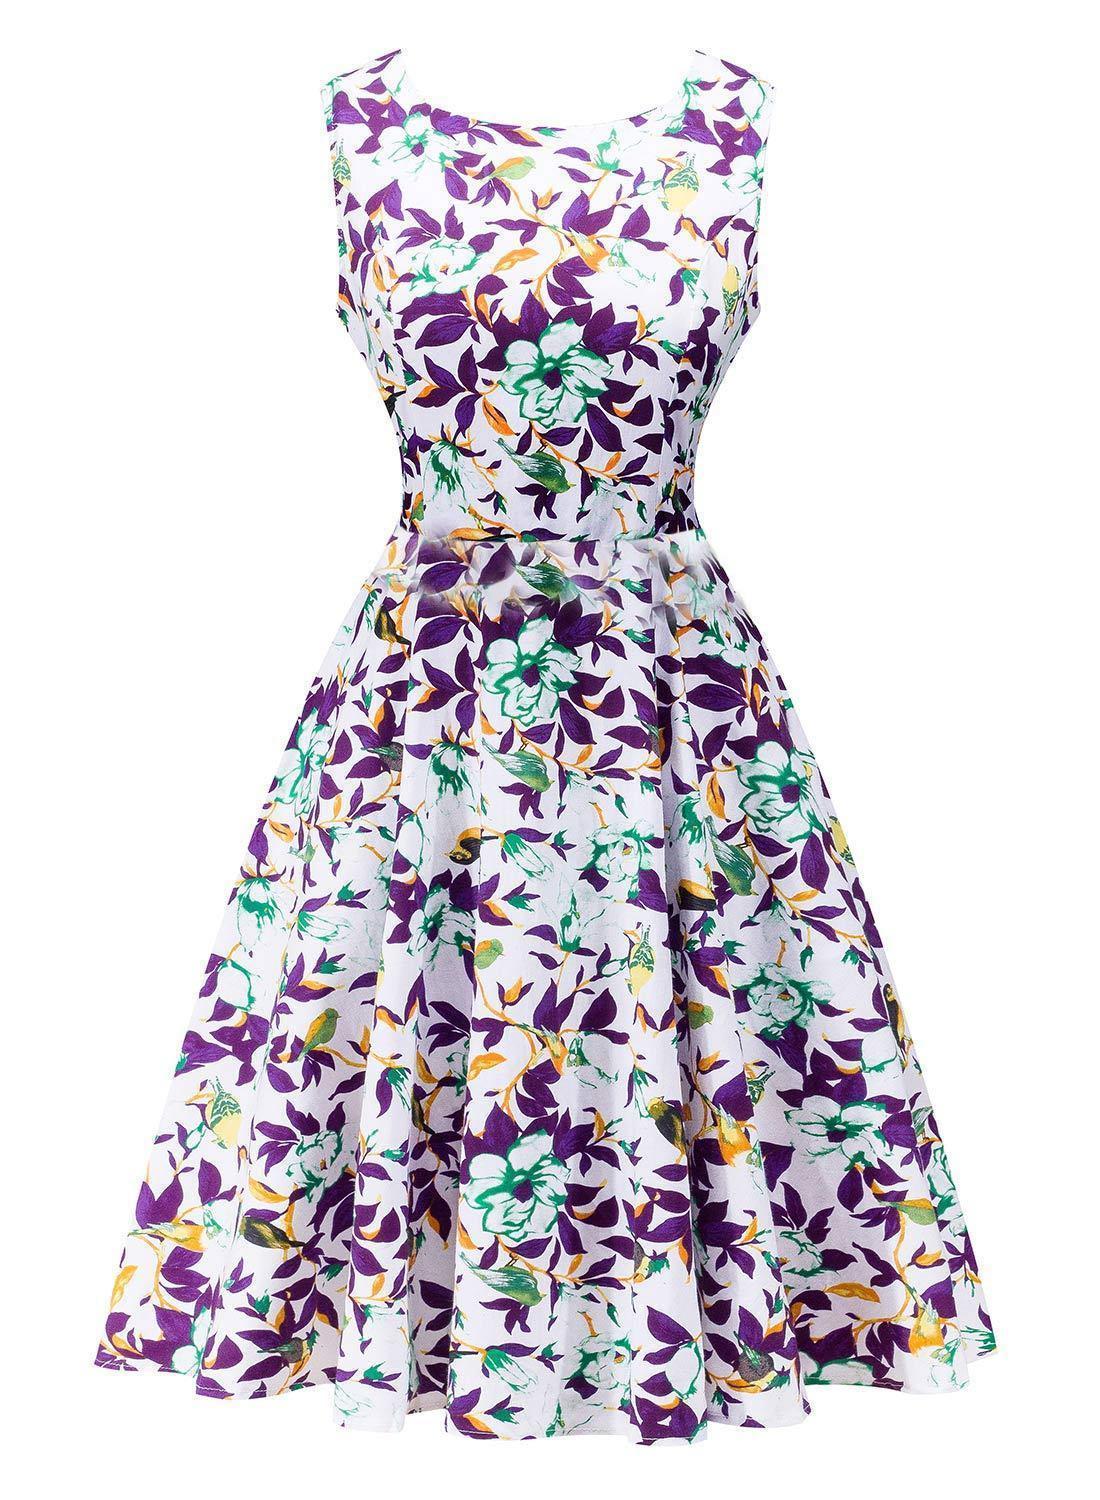 Summer Ladies Floral Print Sleeveless Evening Party Cocktail Bodycon Mini Dress